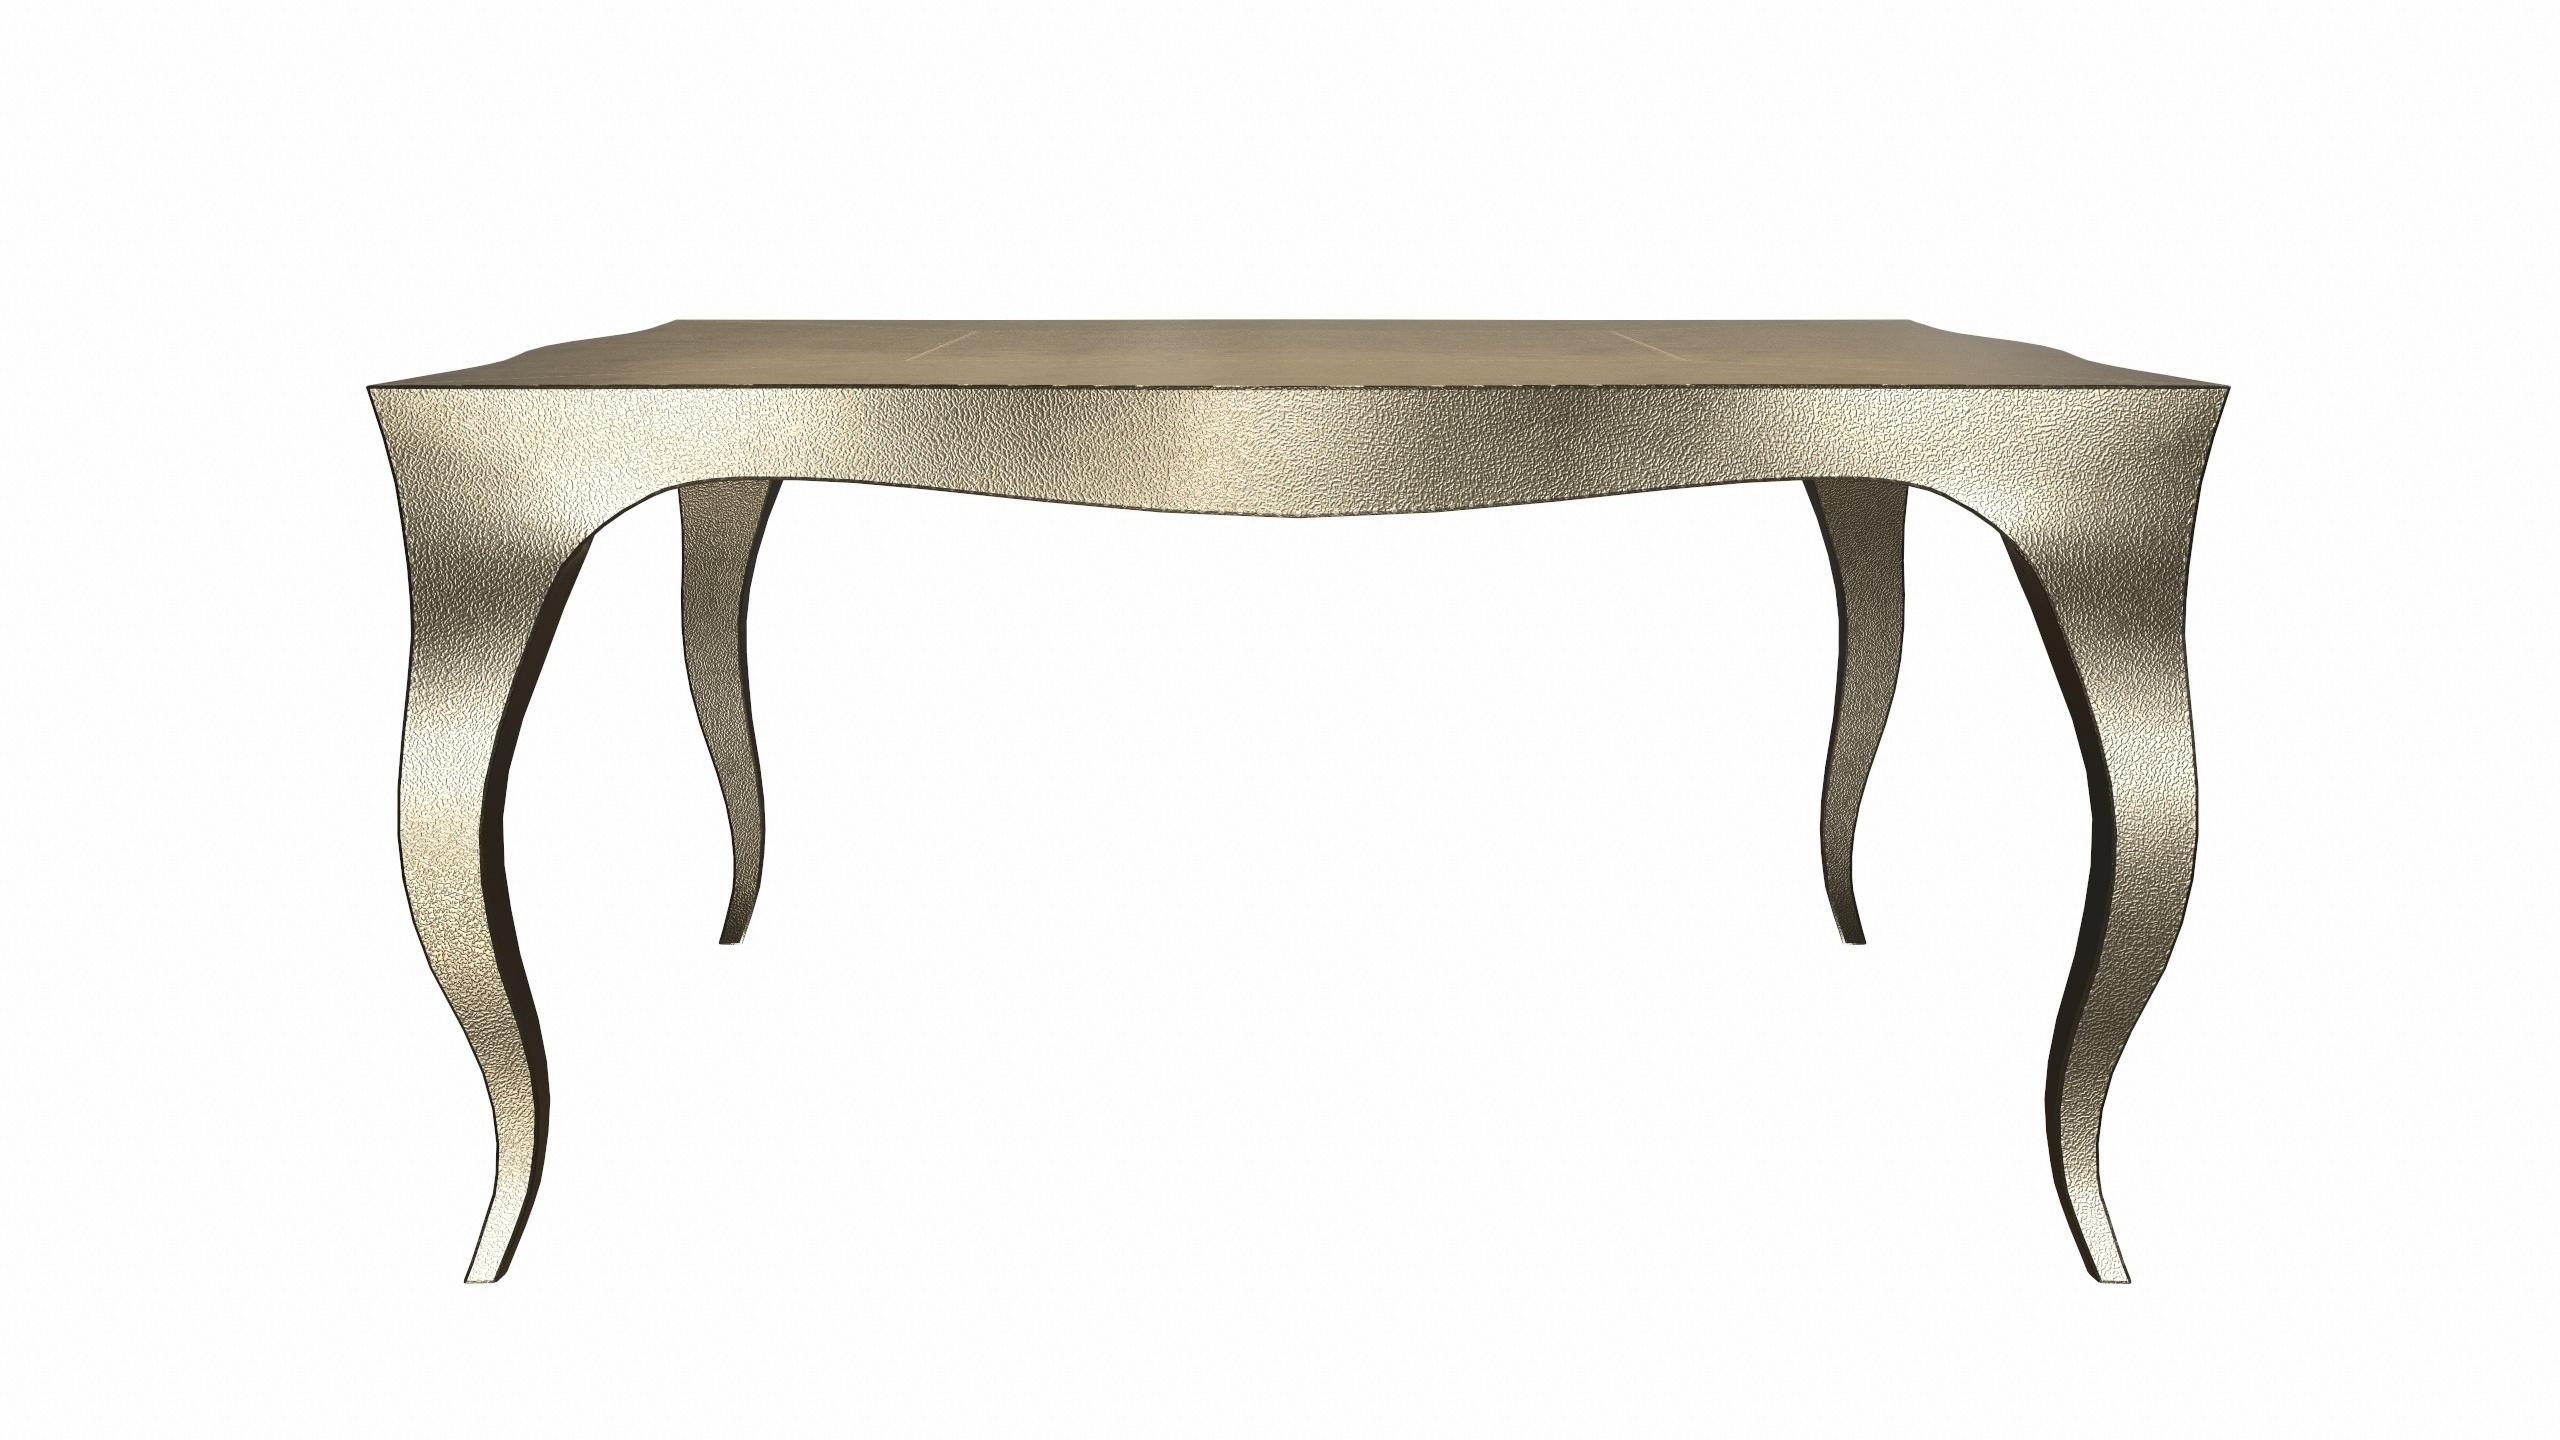 American Louise Art Deco Nesting Tables and Stacking Tables Fine Hammered Brass by Paul M For Sale